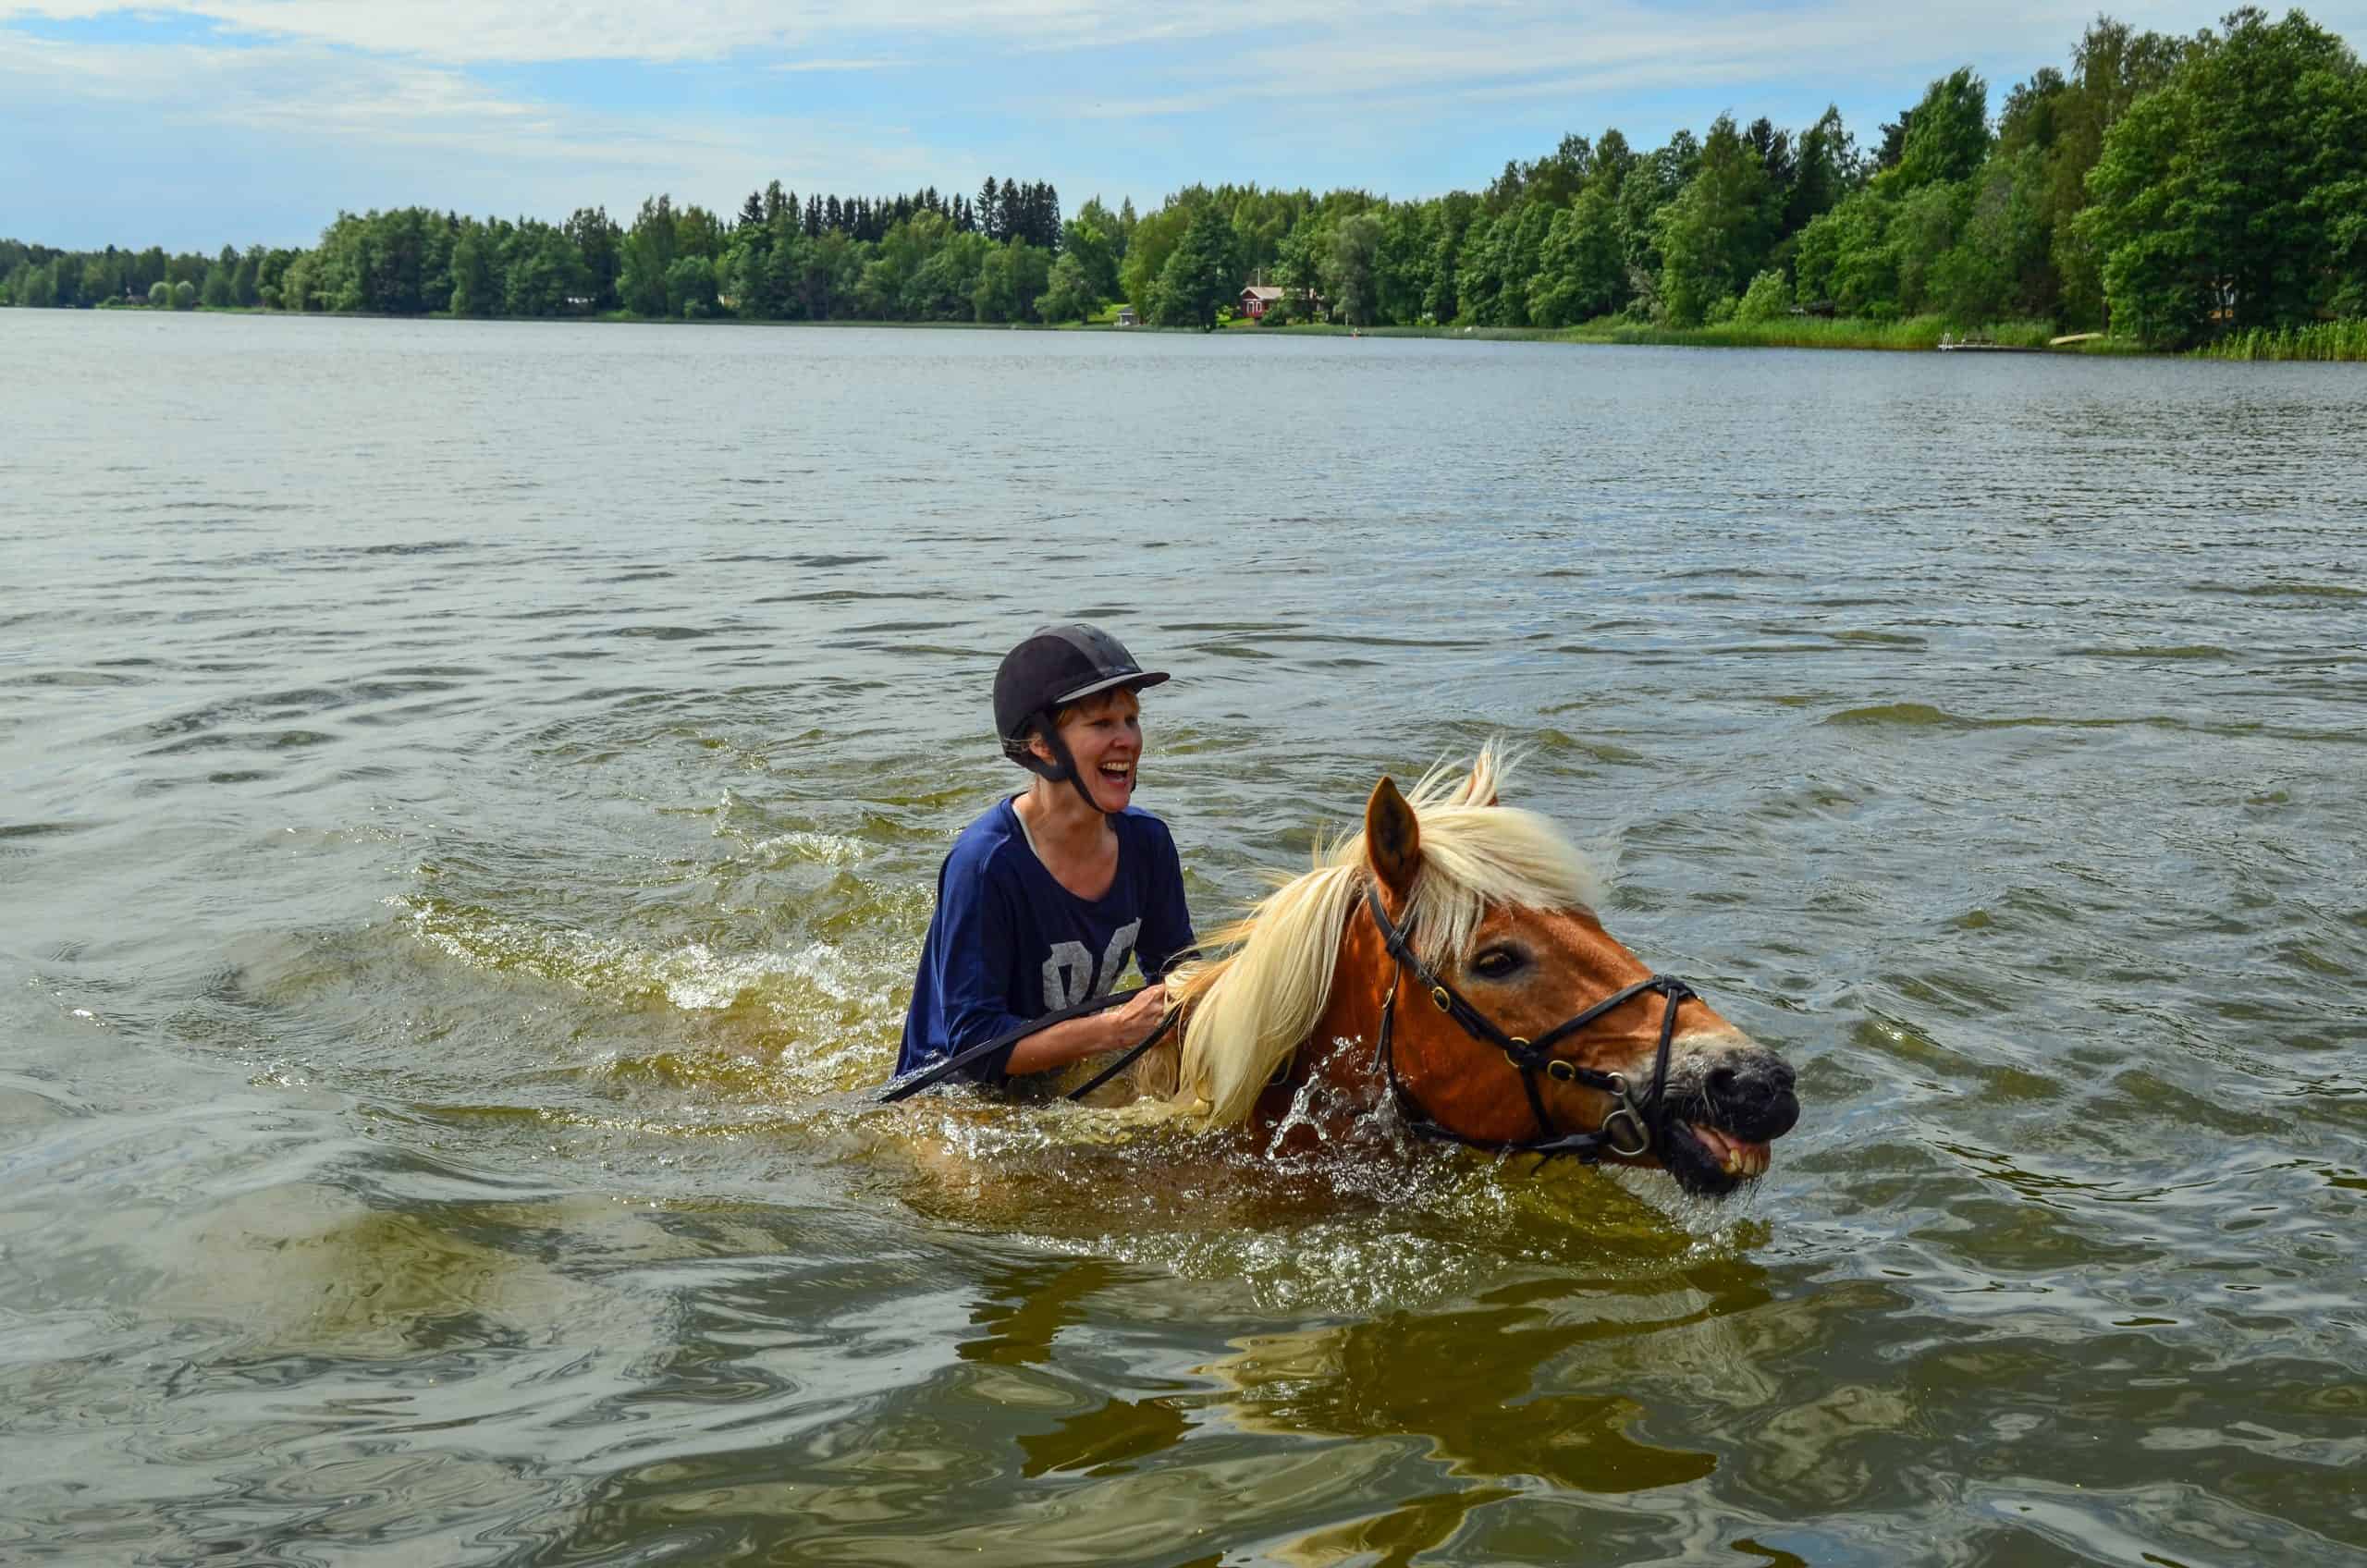 Horse swimming with woman rider